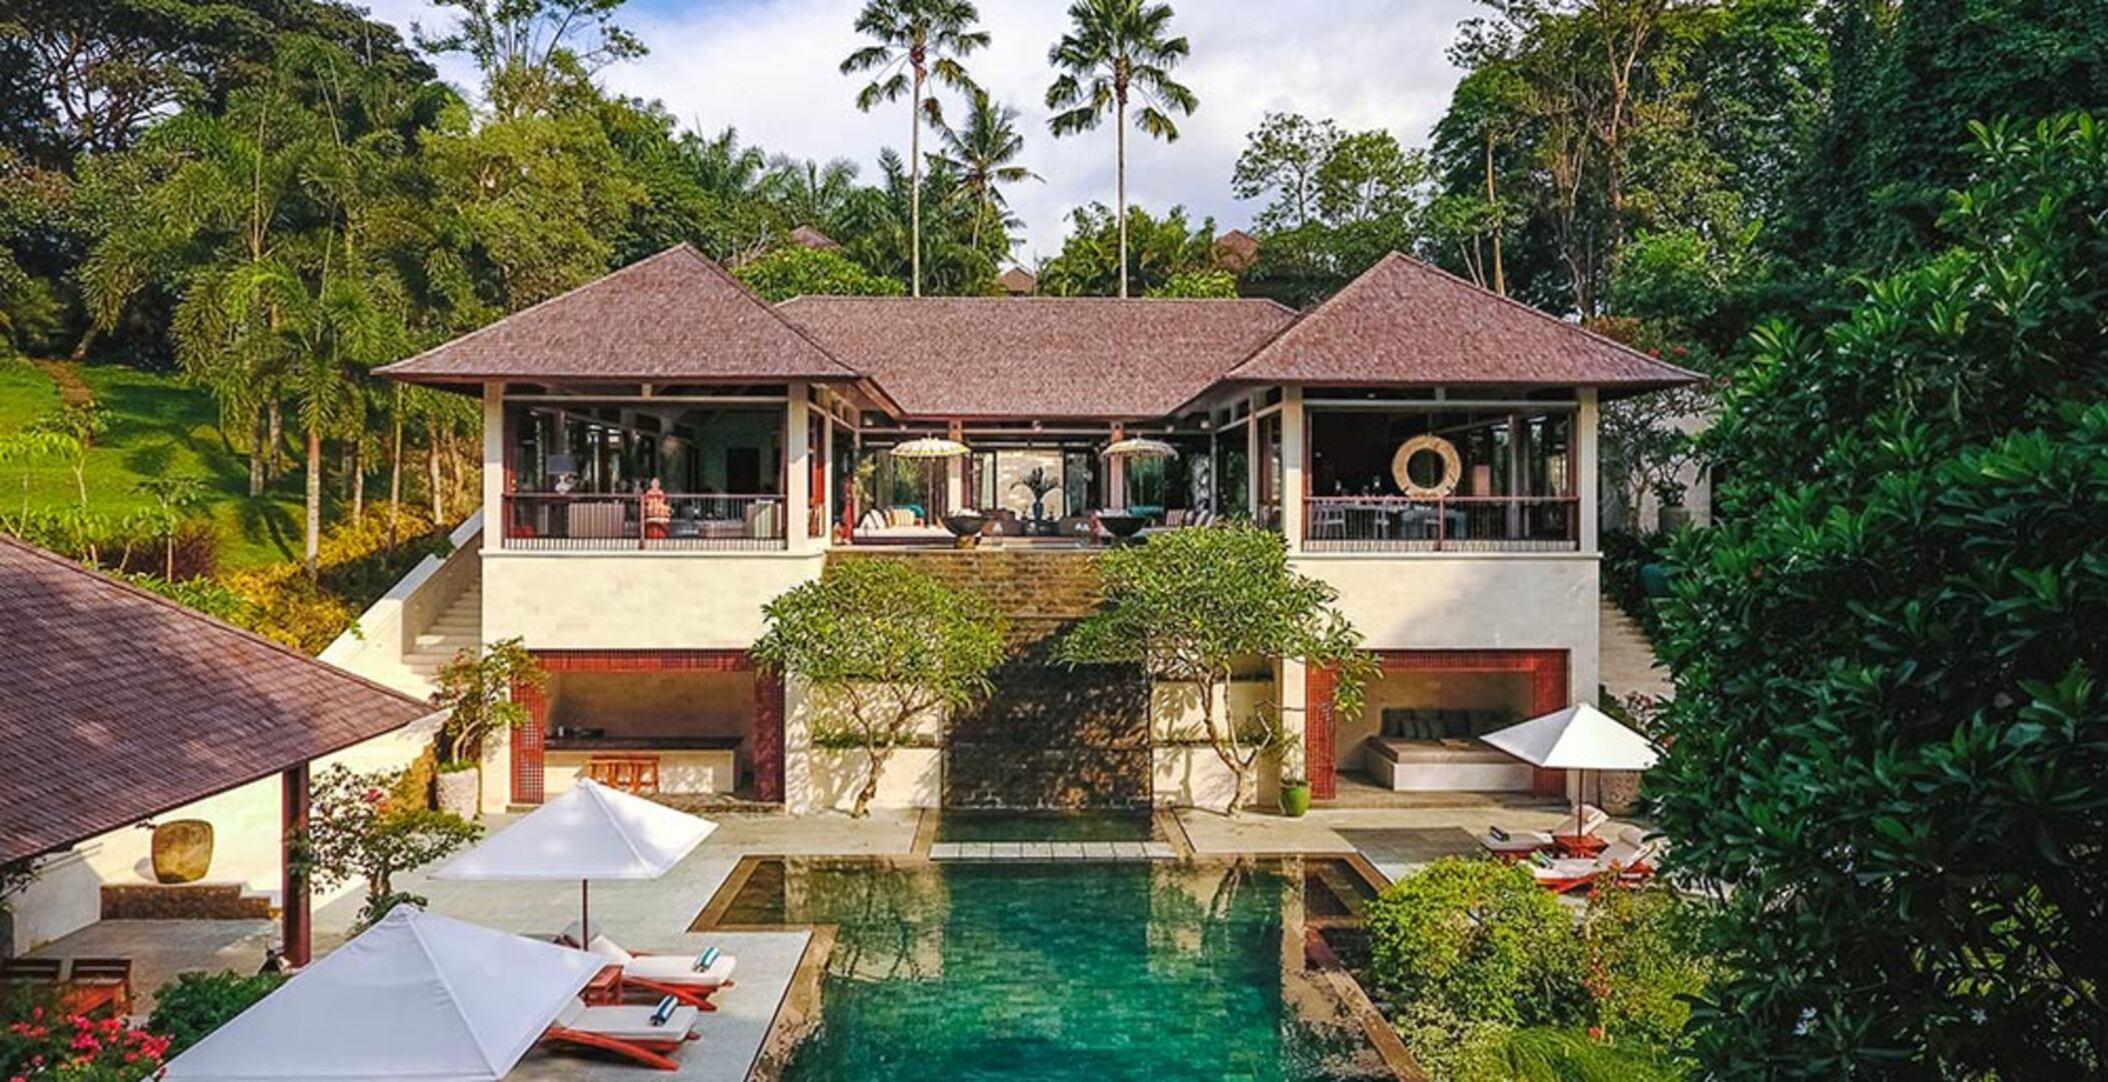 Property Image 1 - Four Bedroom Villa in Bali, Minutes from the Beach